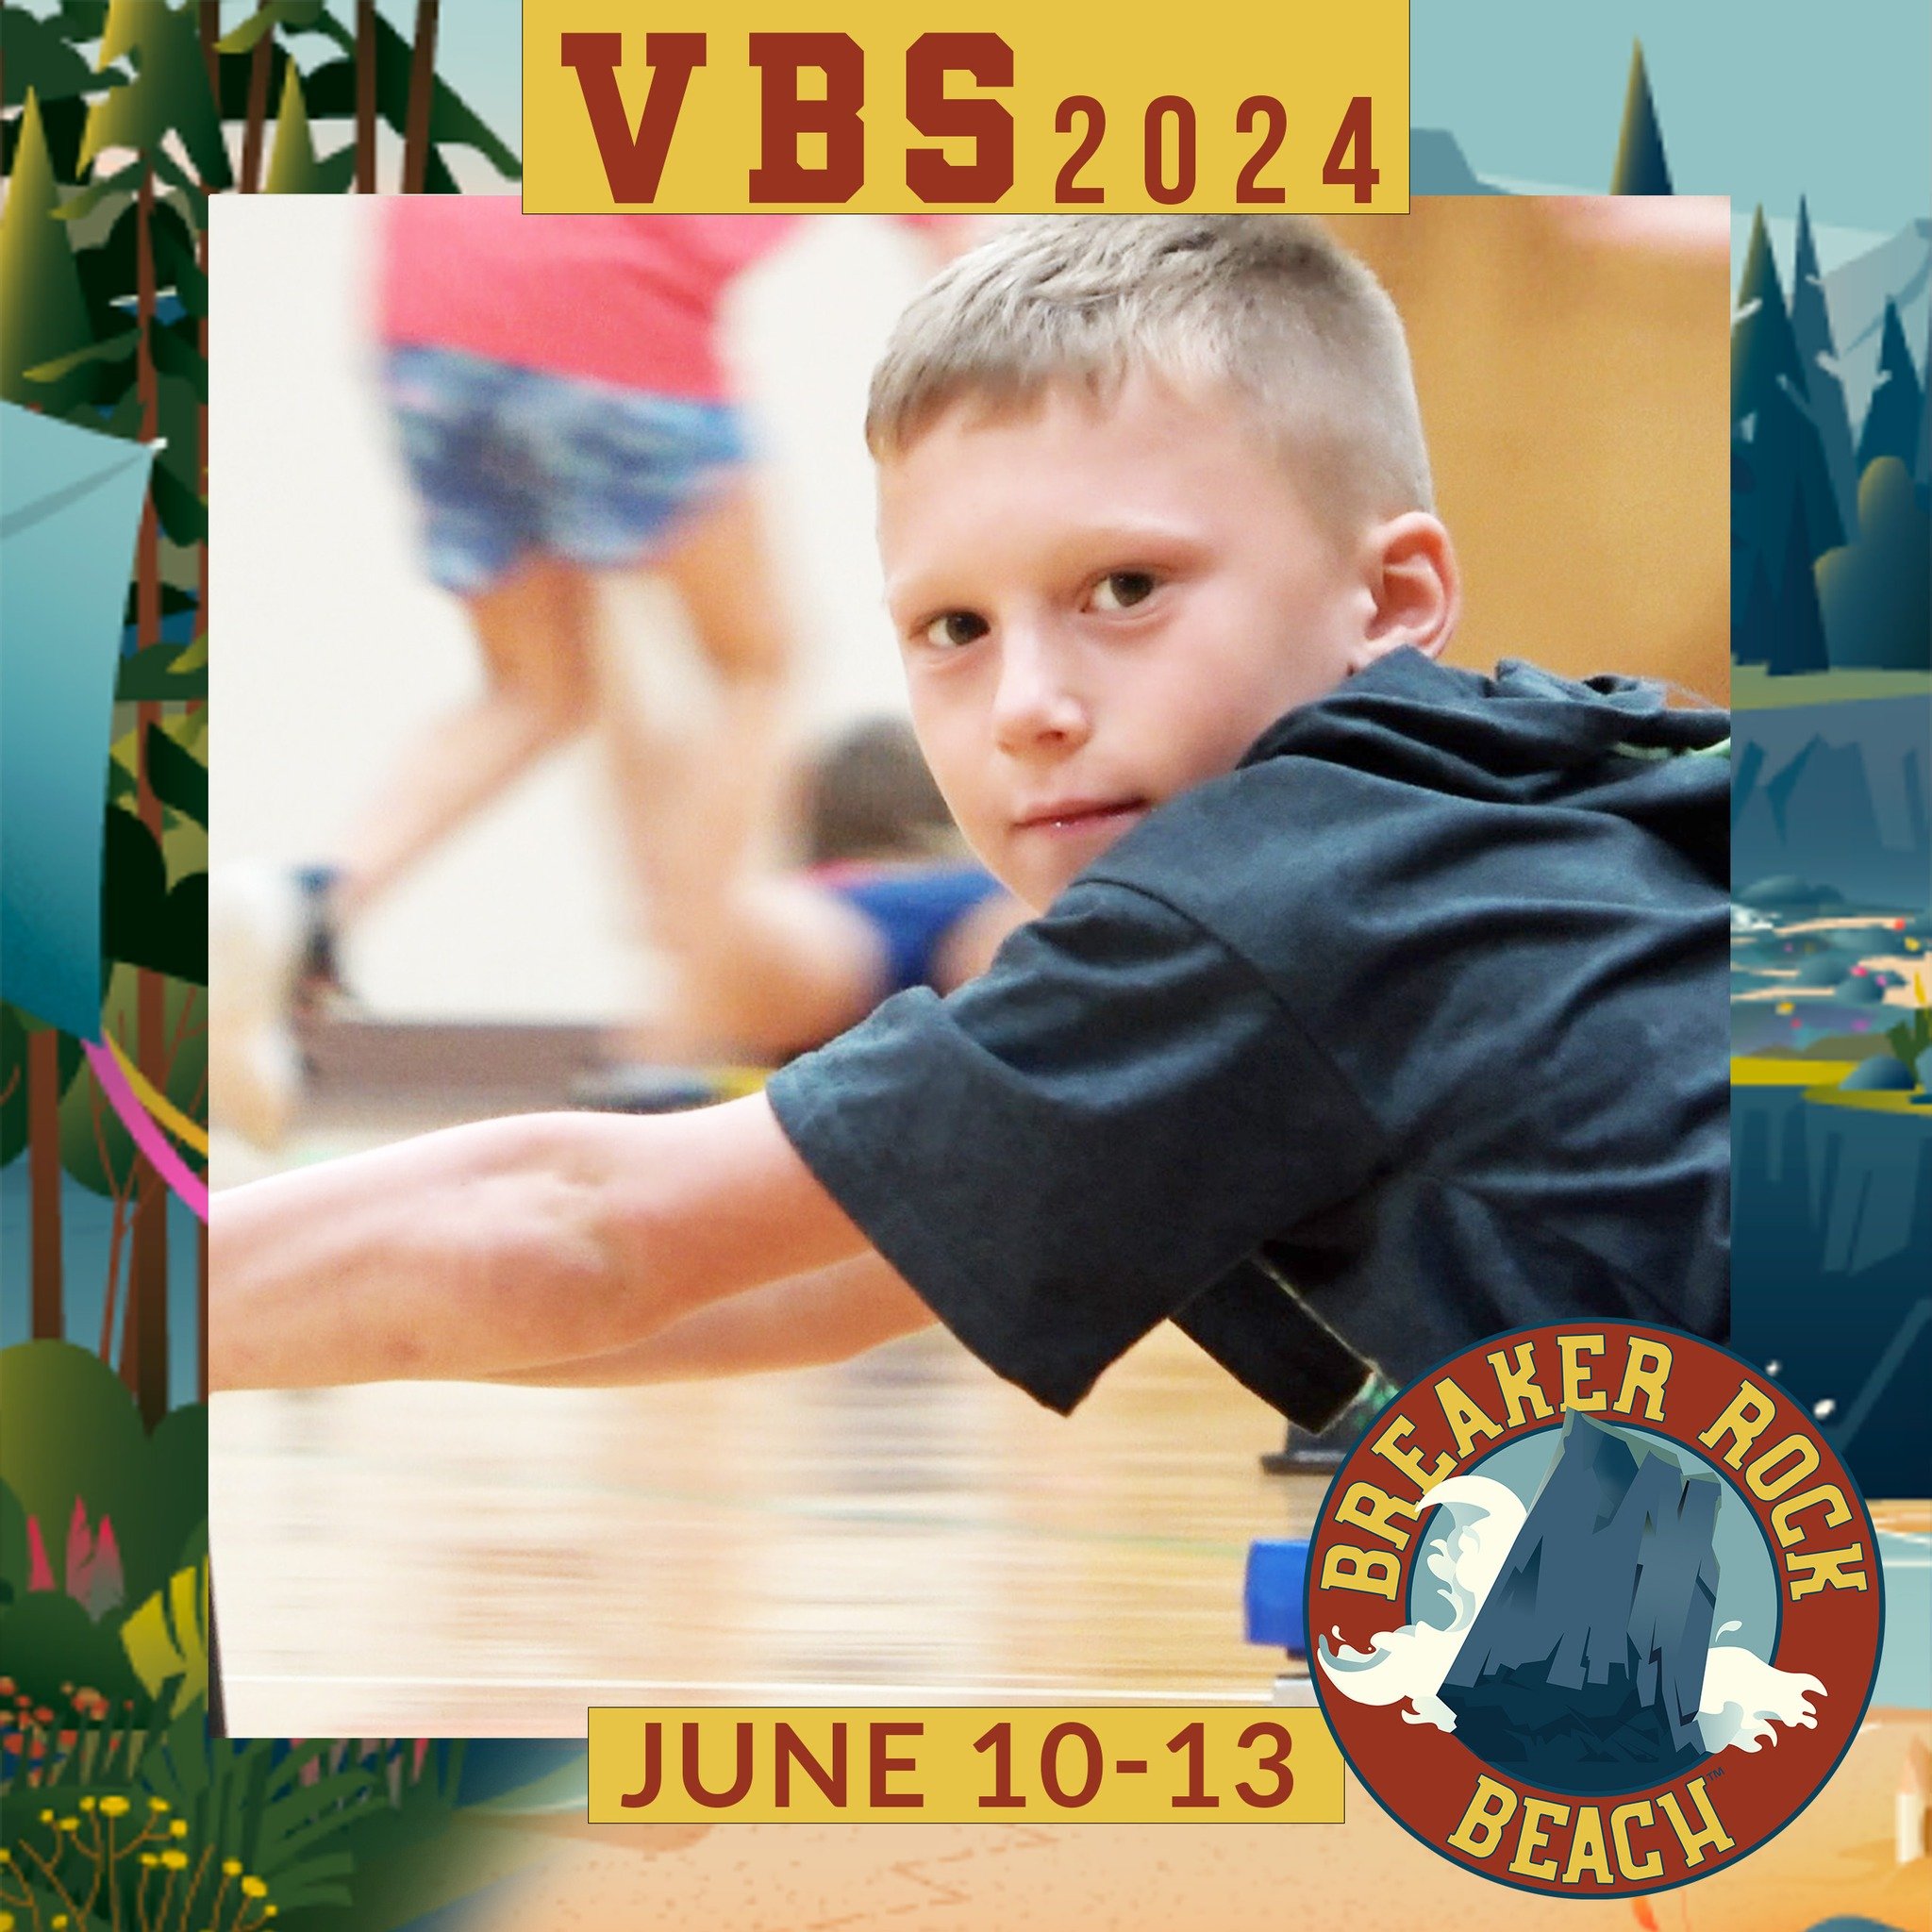 Completed K-6th Grade
Register today! fbcconroe.org/vbs